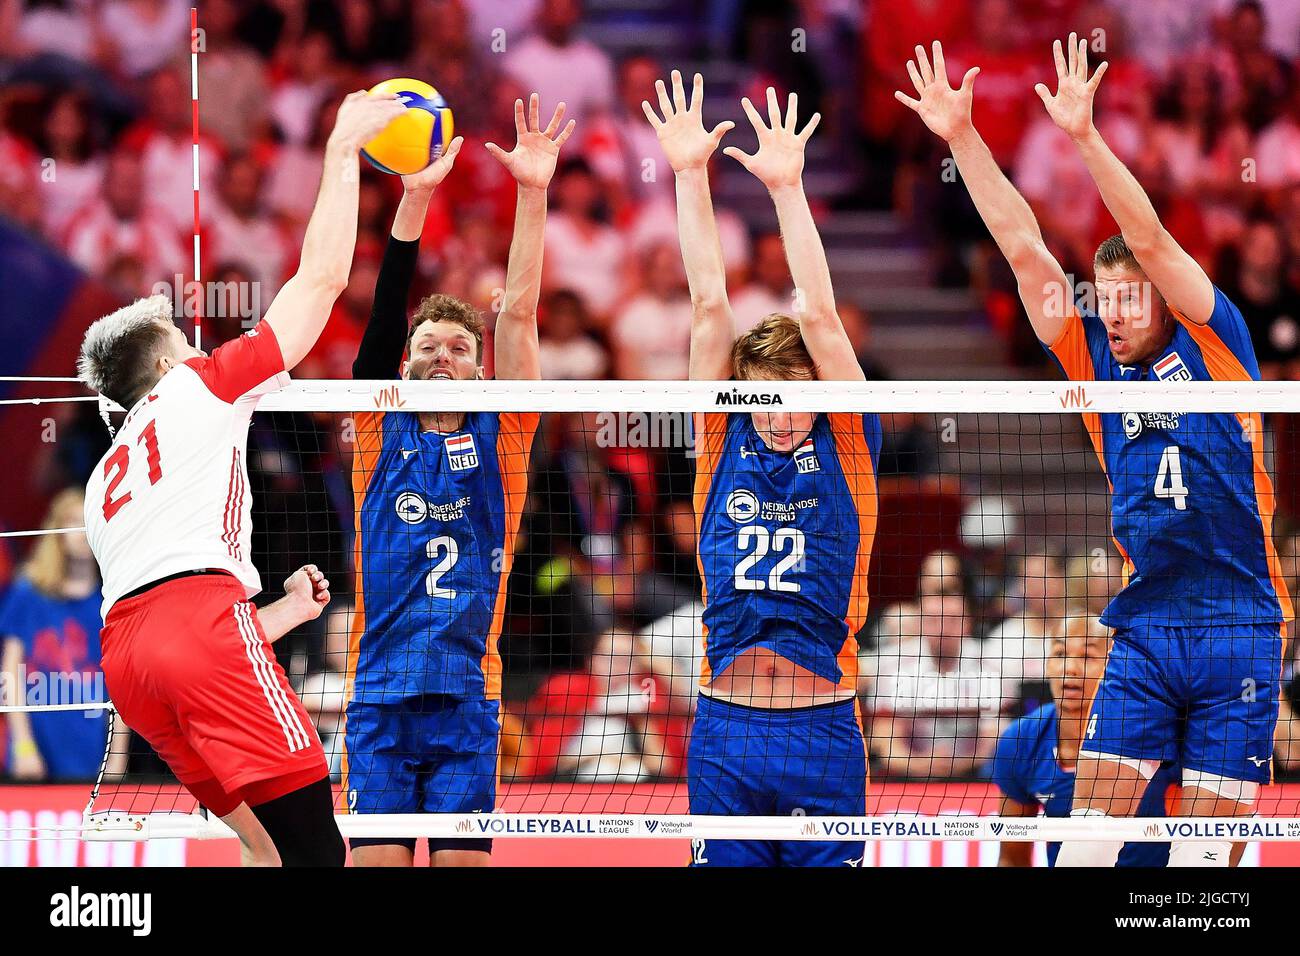 Tomasz Fornal (L) of Poland and Wessel Keemink (2L), Twan Wittenburg (2R) i Thijs Ter Horst (R) of the Netherlands during the 2022 men's FIVB Volleyball Nations League match between Poland and the Netherlands in Gdansk, Poland, 09 July 2022. Stock Photo